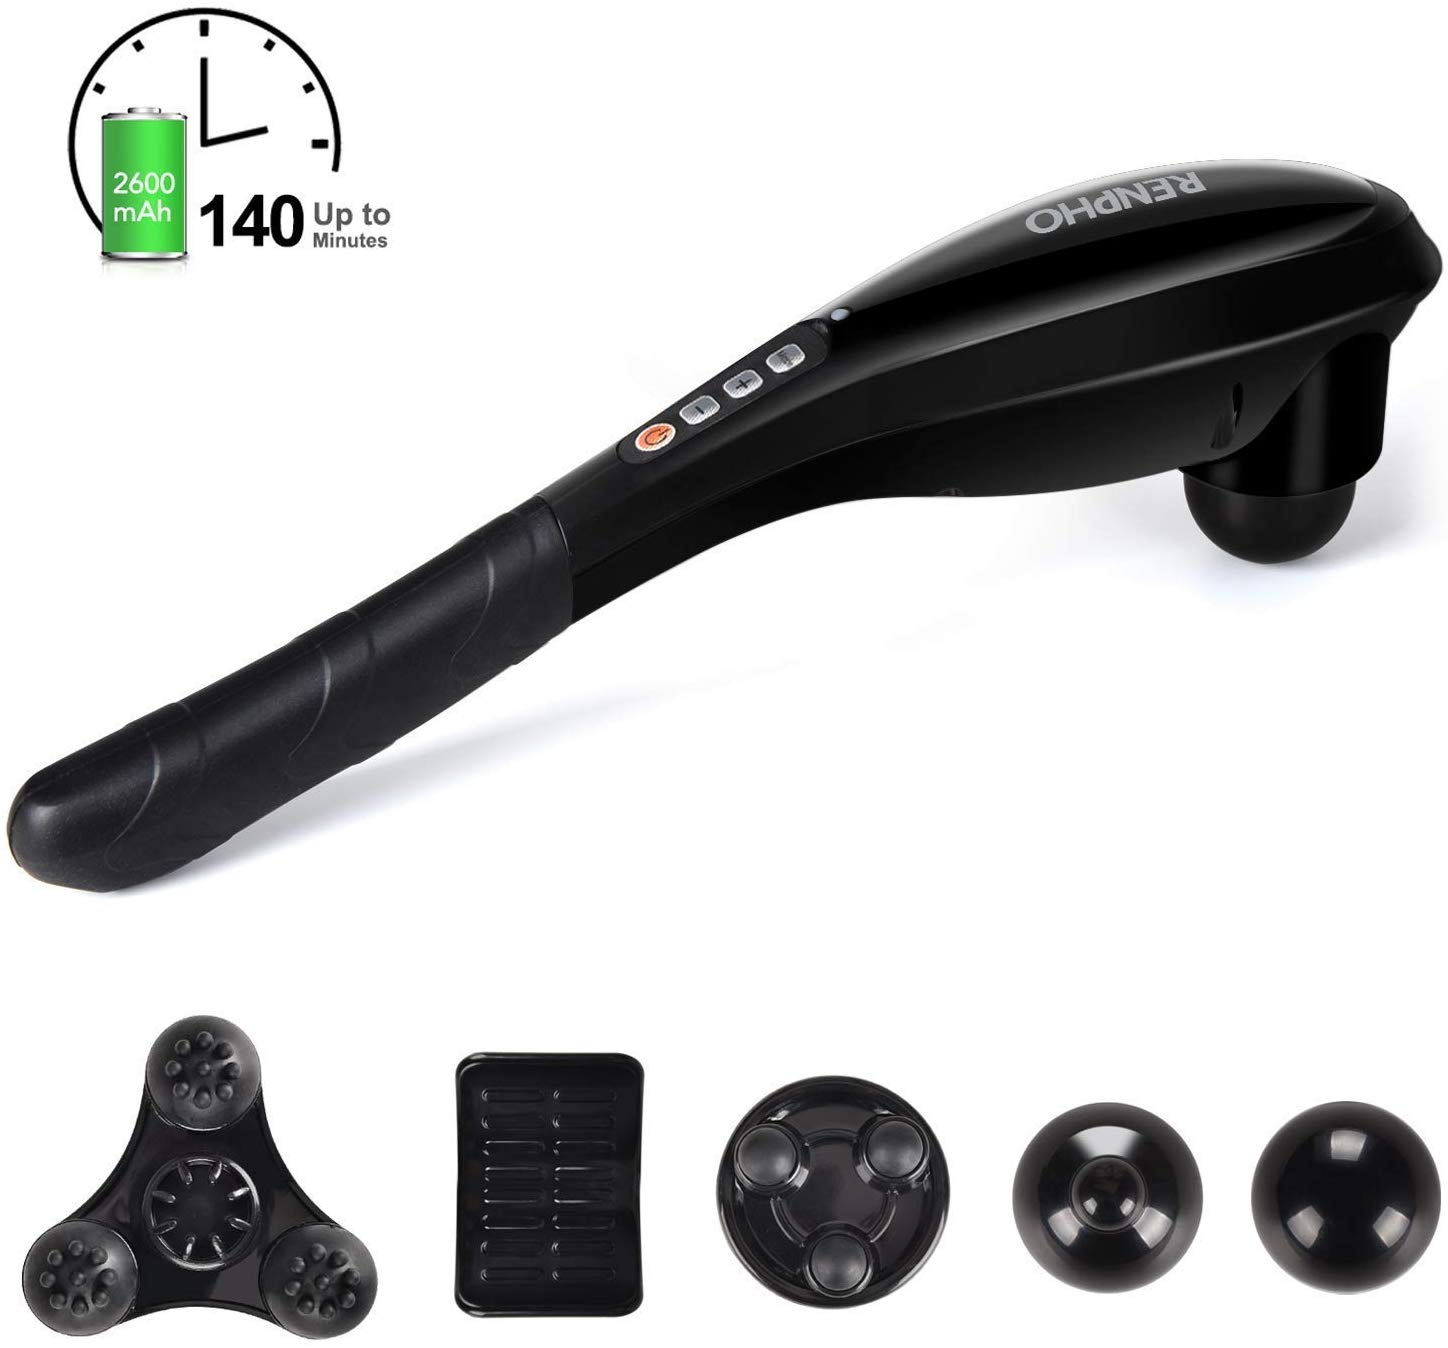 RENPHO Rechargeable Hand Held Deep Tissue Massager for Muscles, Back, Foot, Neck, Shoulder, Leg, Calf Pain Relief - Cordless Electric Percussion Full Body Massage with Portable Design - Black